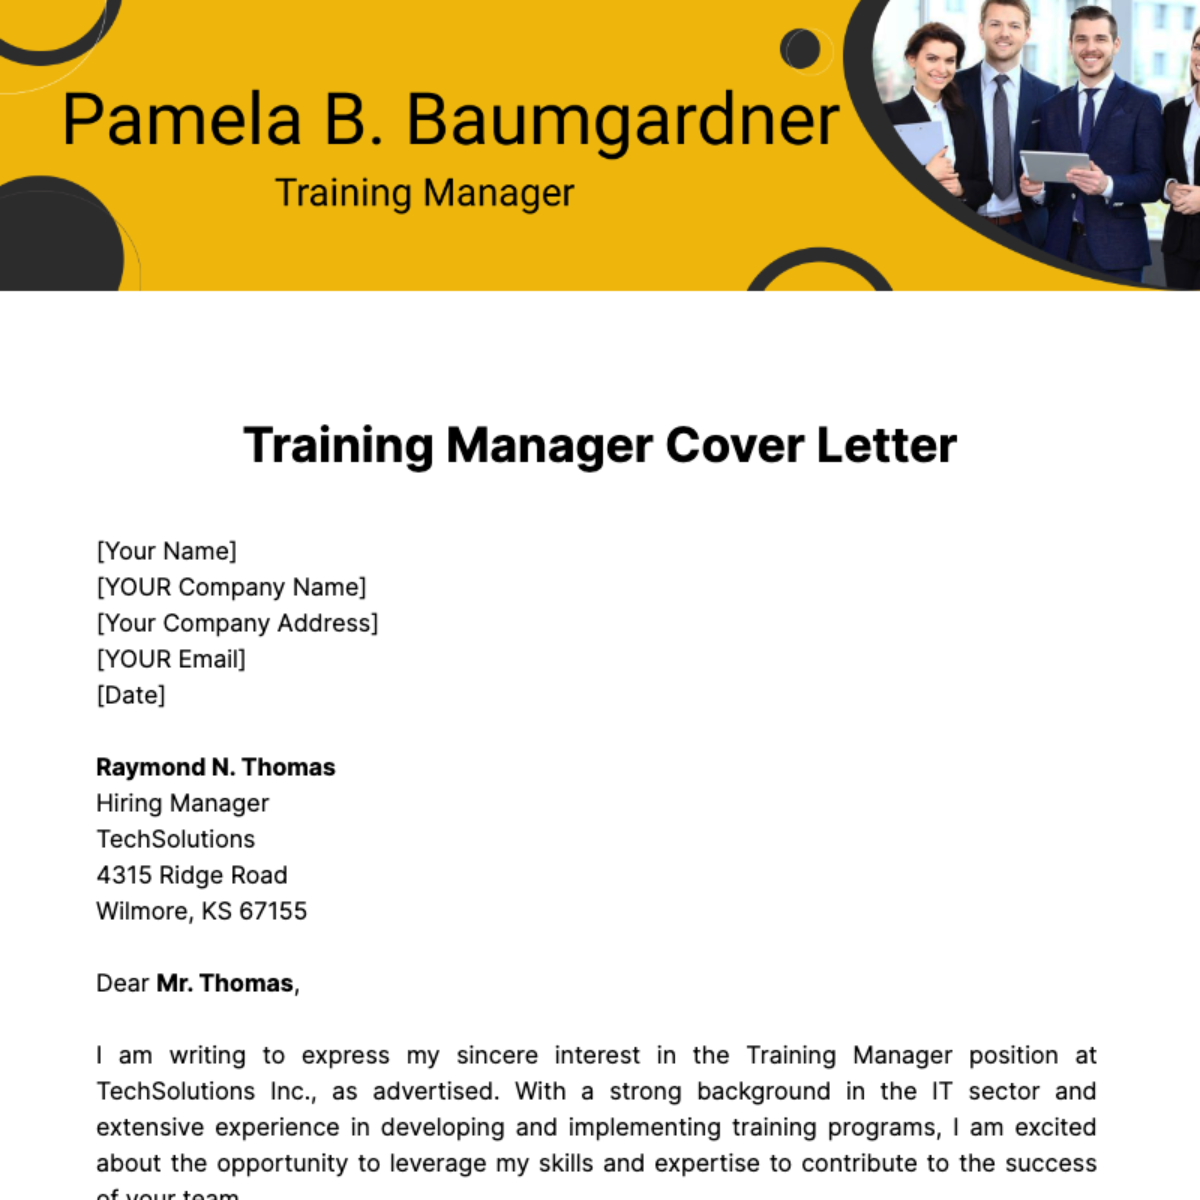 Training Manager Cover Letter Template